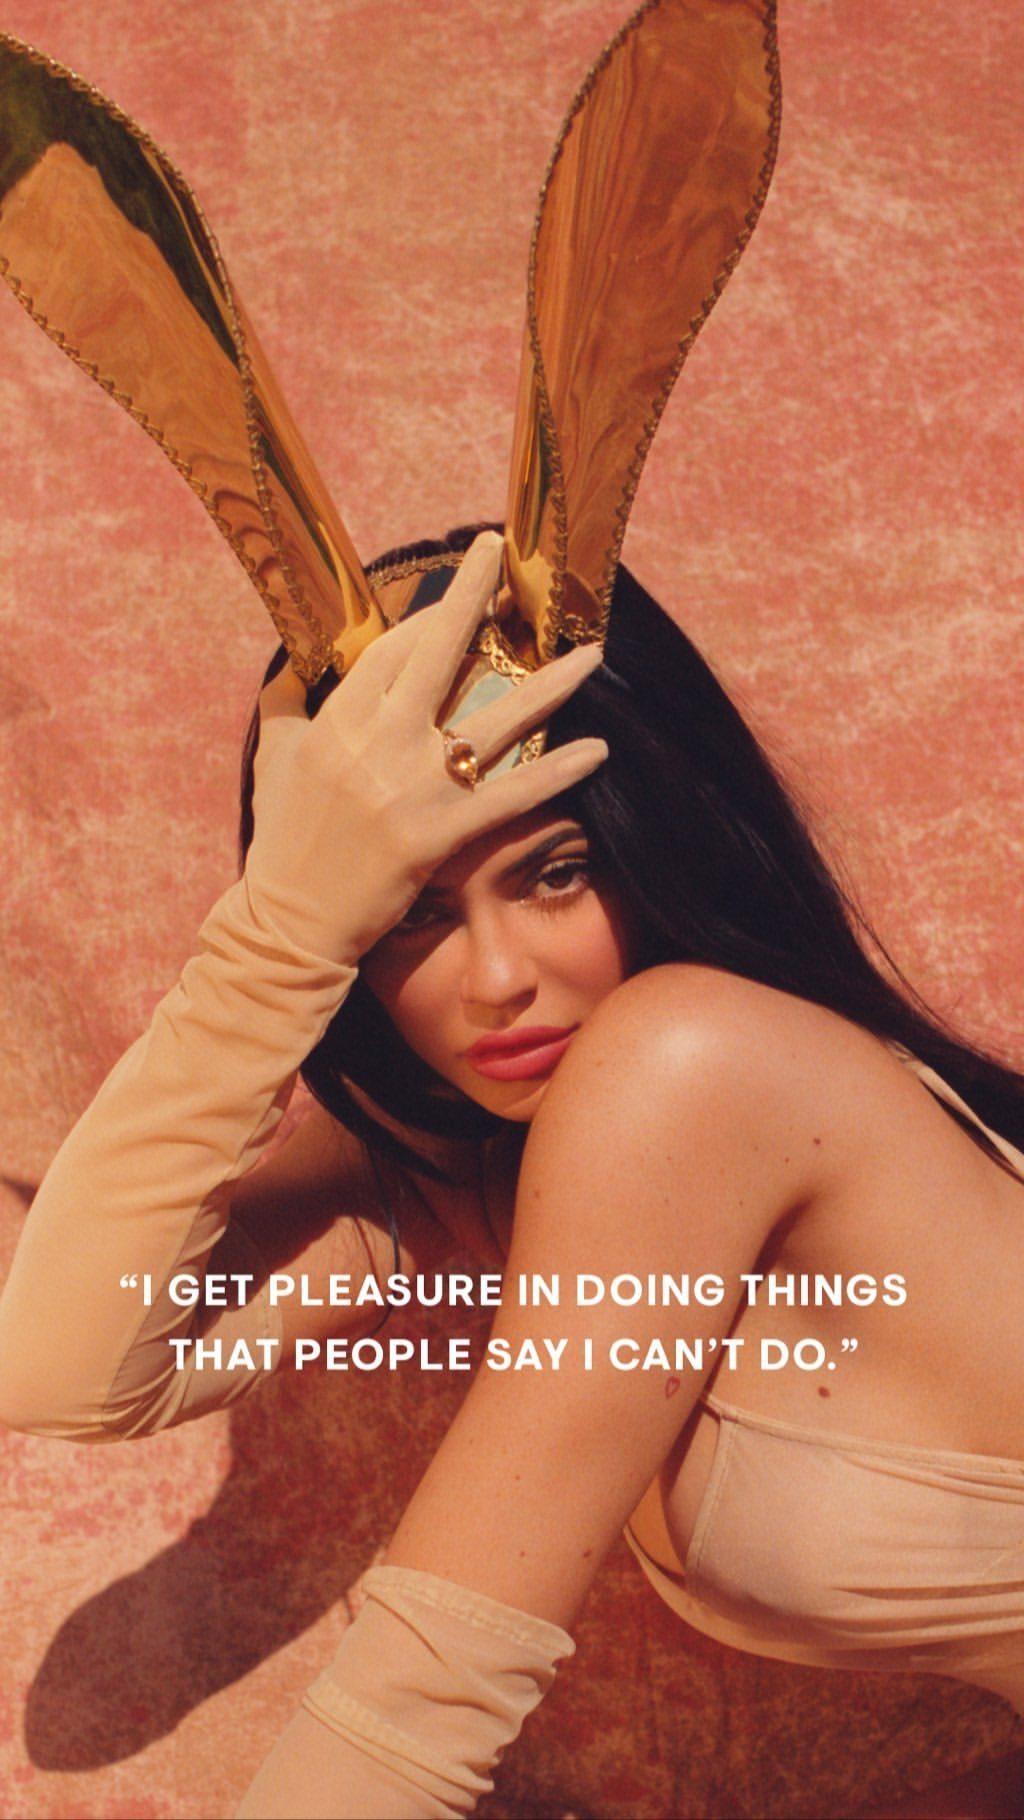 kylie jenner playboy photoshoot leaked PIPUEX